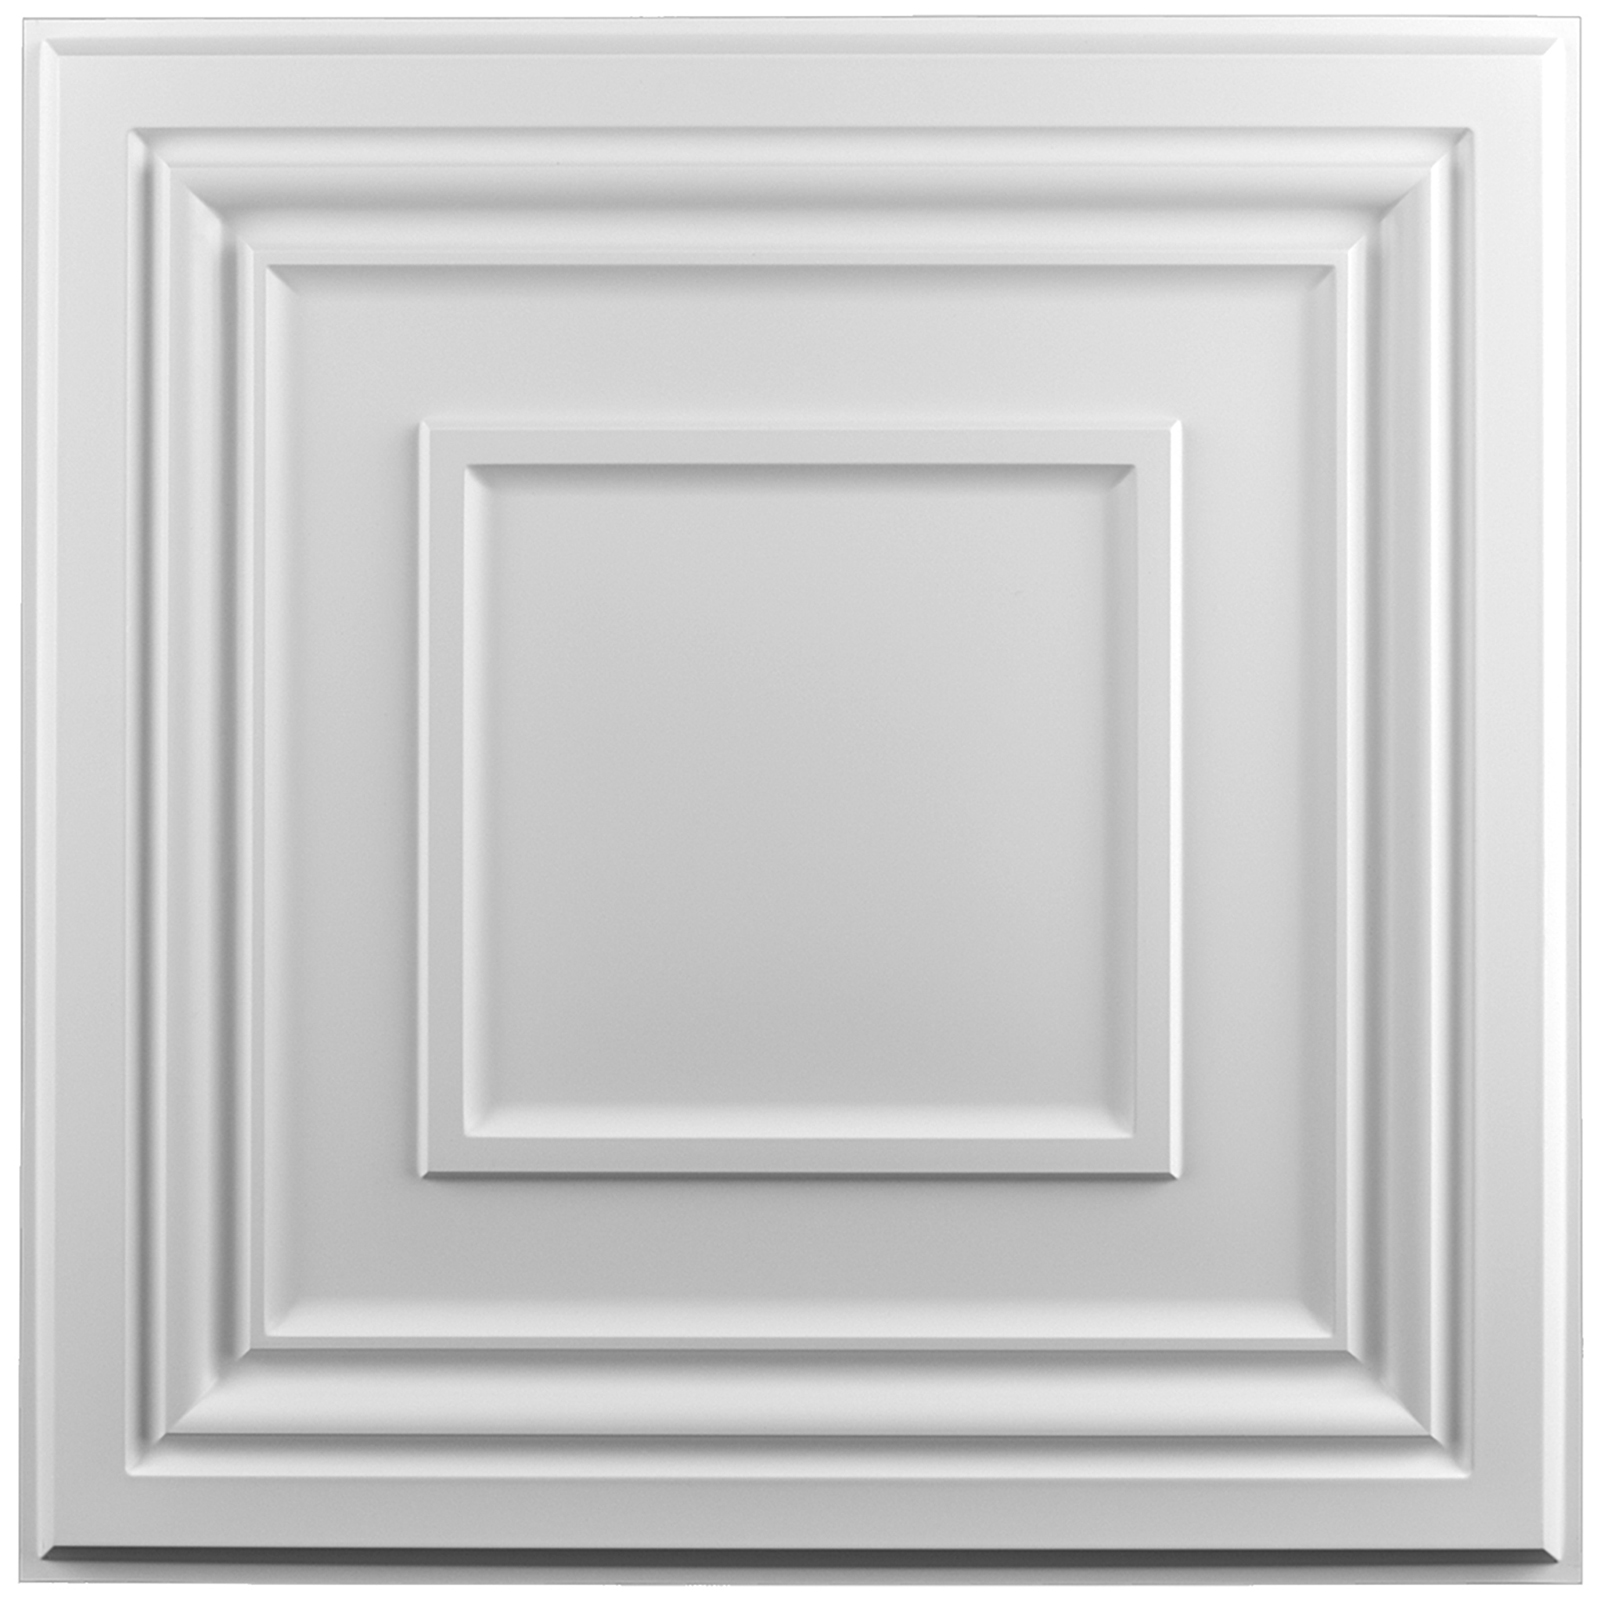 A10901WTP12 - Art3d Decorative Drop Ceiling Tile 2x2 Pack of 12pcs, Glue up Ceiling Panel Square Relief in White